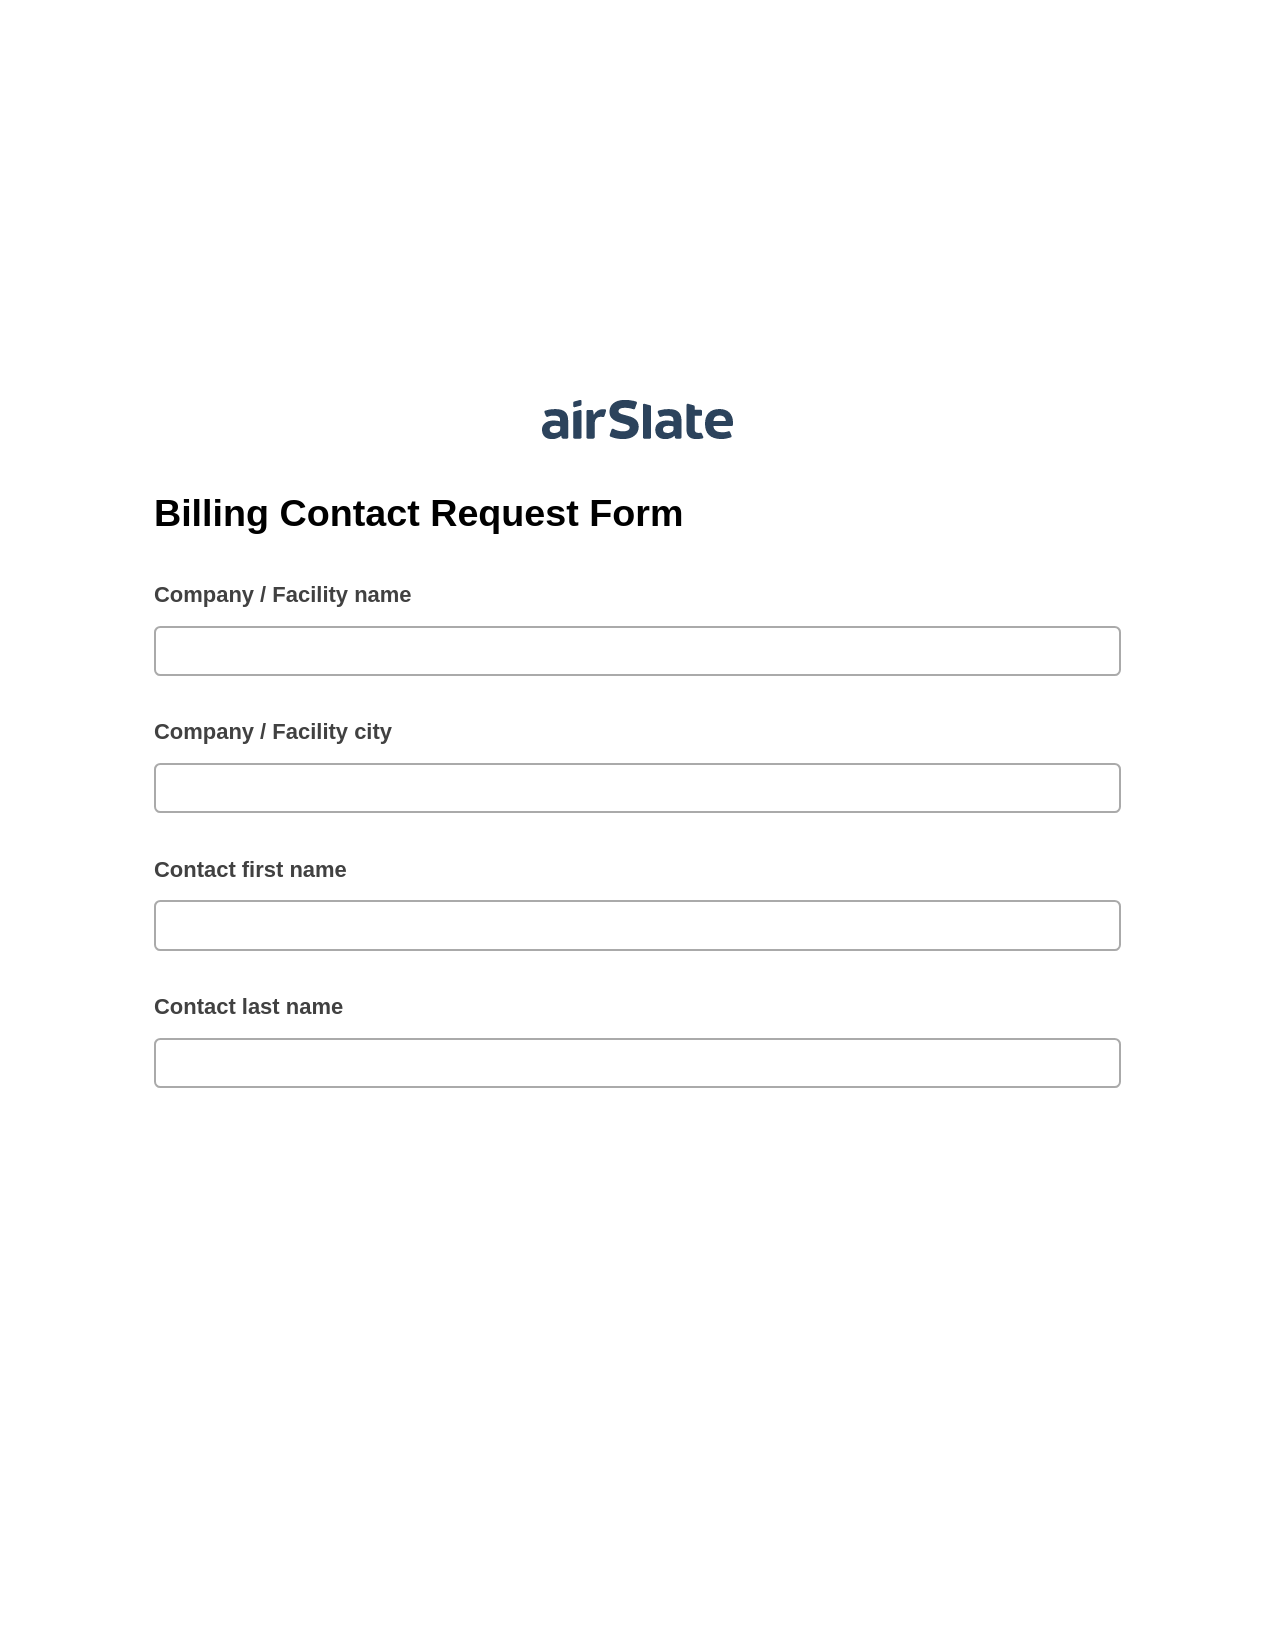 Multirole Billing Contact Request Form Pre-fill from another Slate Bot, Google Cloud Print Bot, Archive to SharePoint Folder Bot